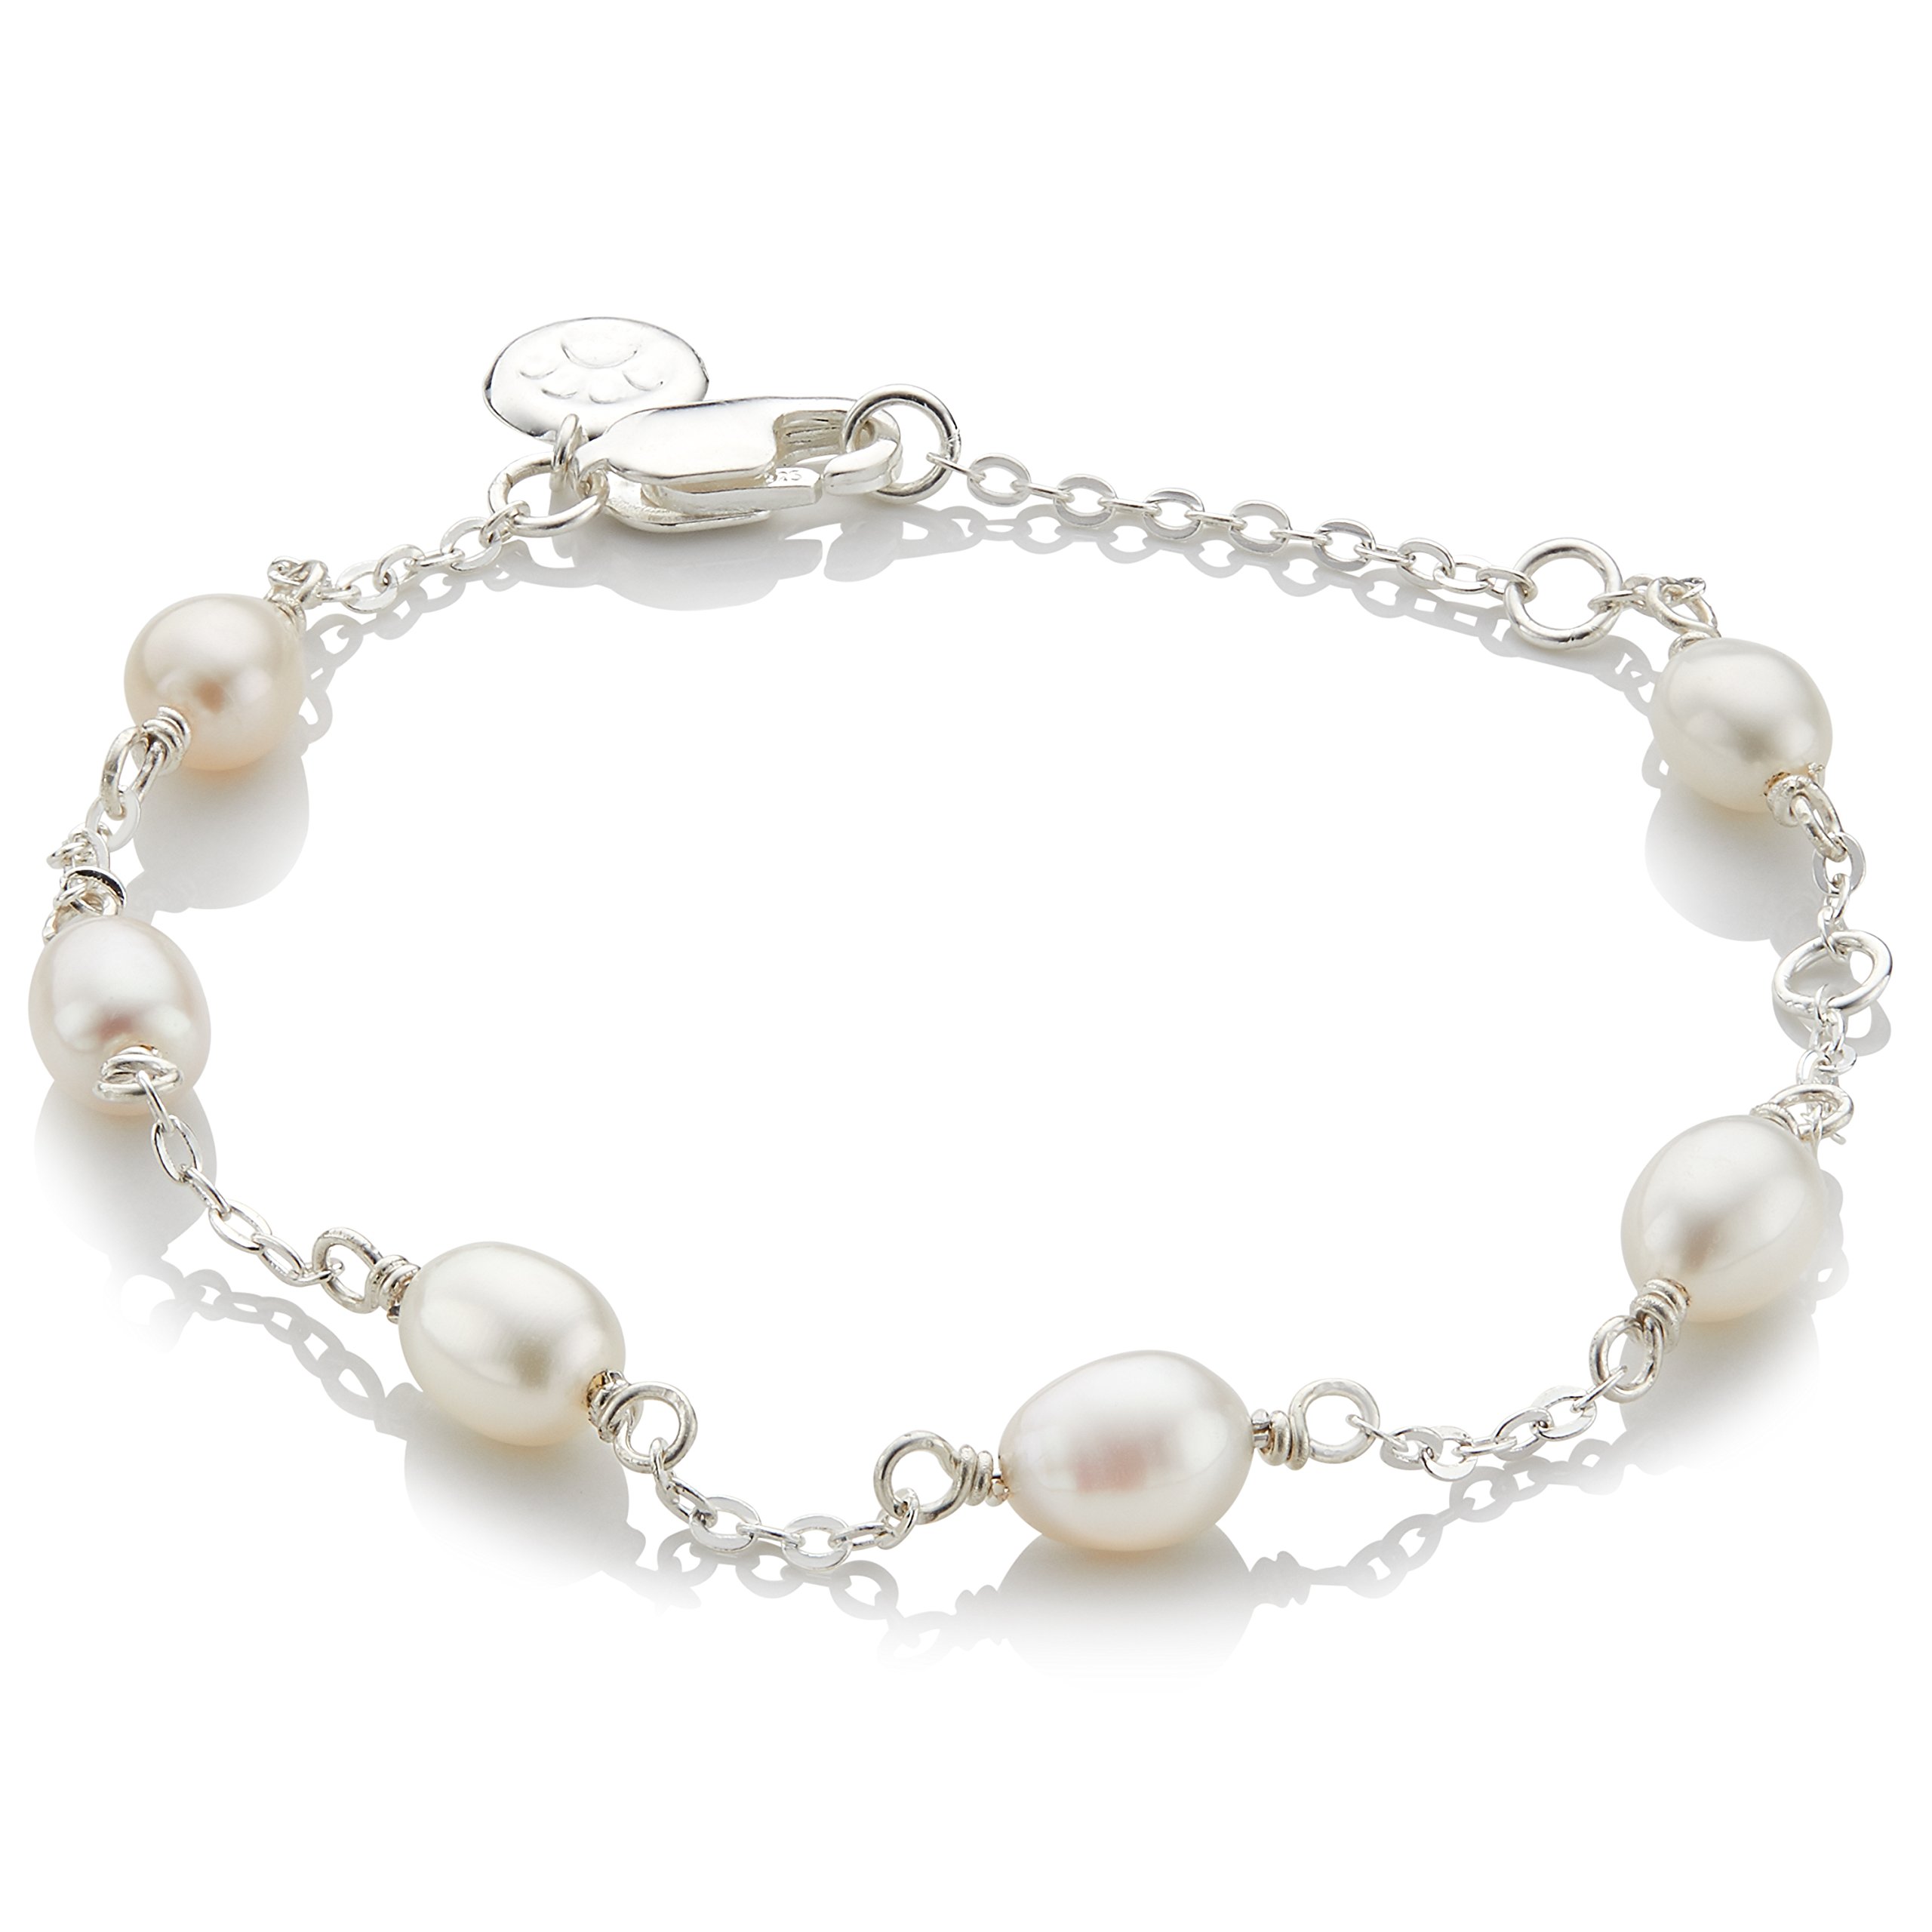 Molly B London Sterling Silver & Pearl Bracelet. Adjustable, Dainty Jewelry Bracelets For Girls, June Birthstone. Perfect First Communion Gifts For Girls, Baptism Gifts, Birthday Gift, Sweet 16